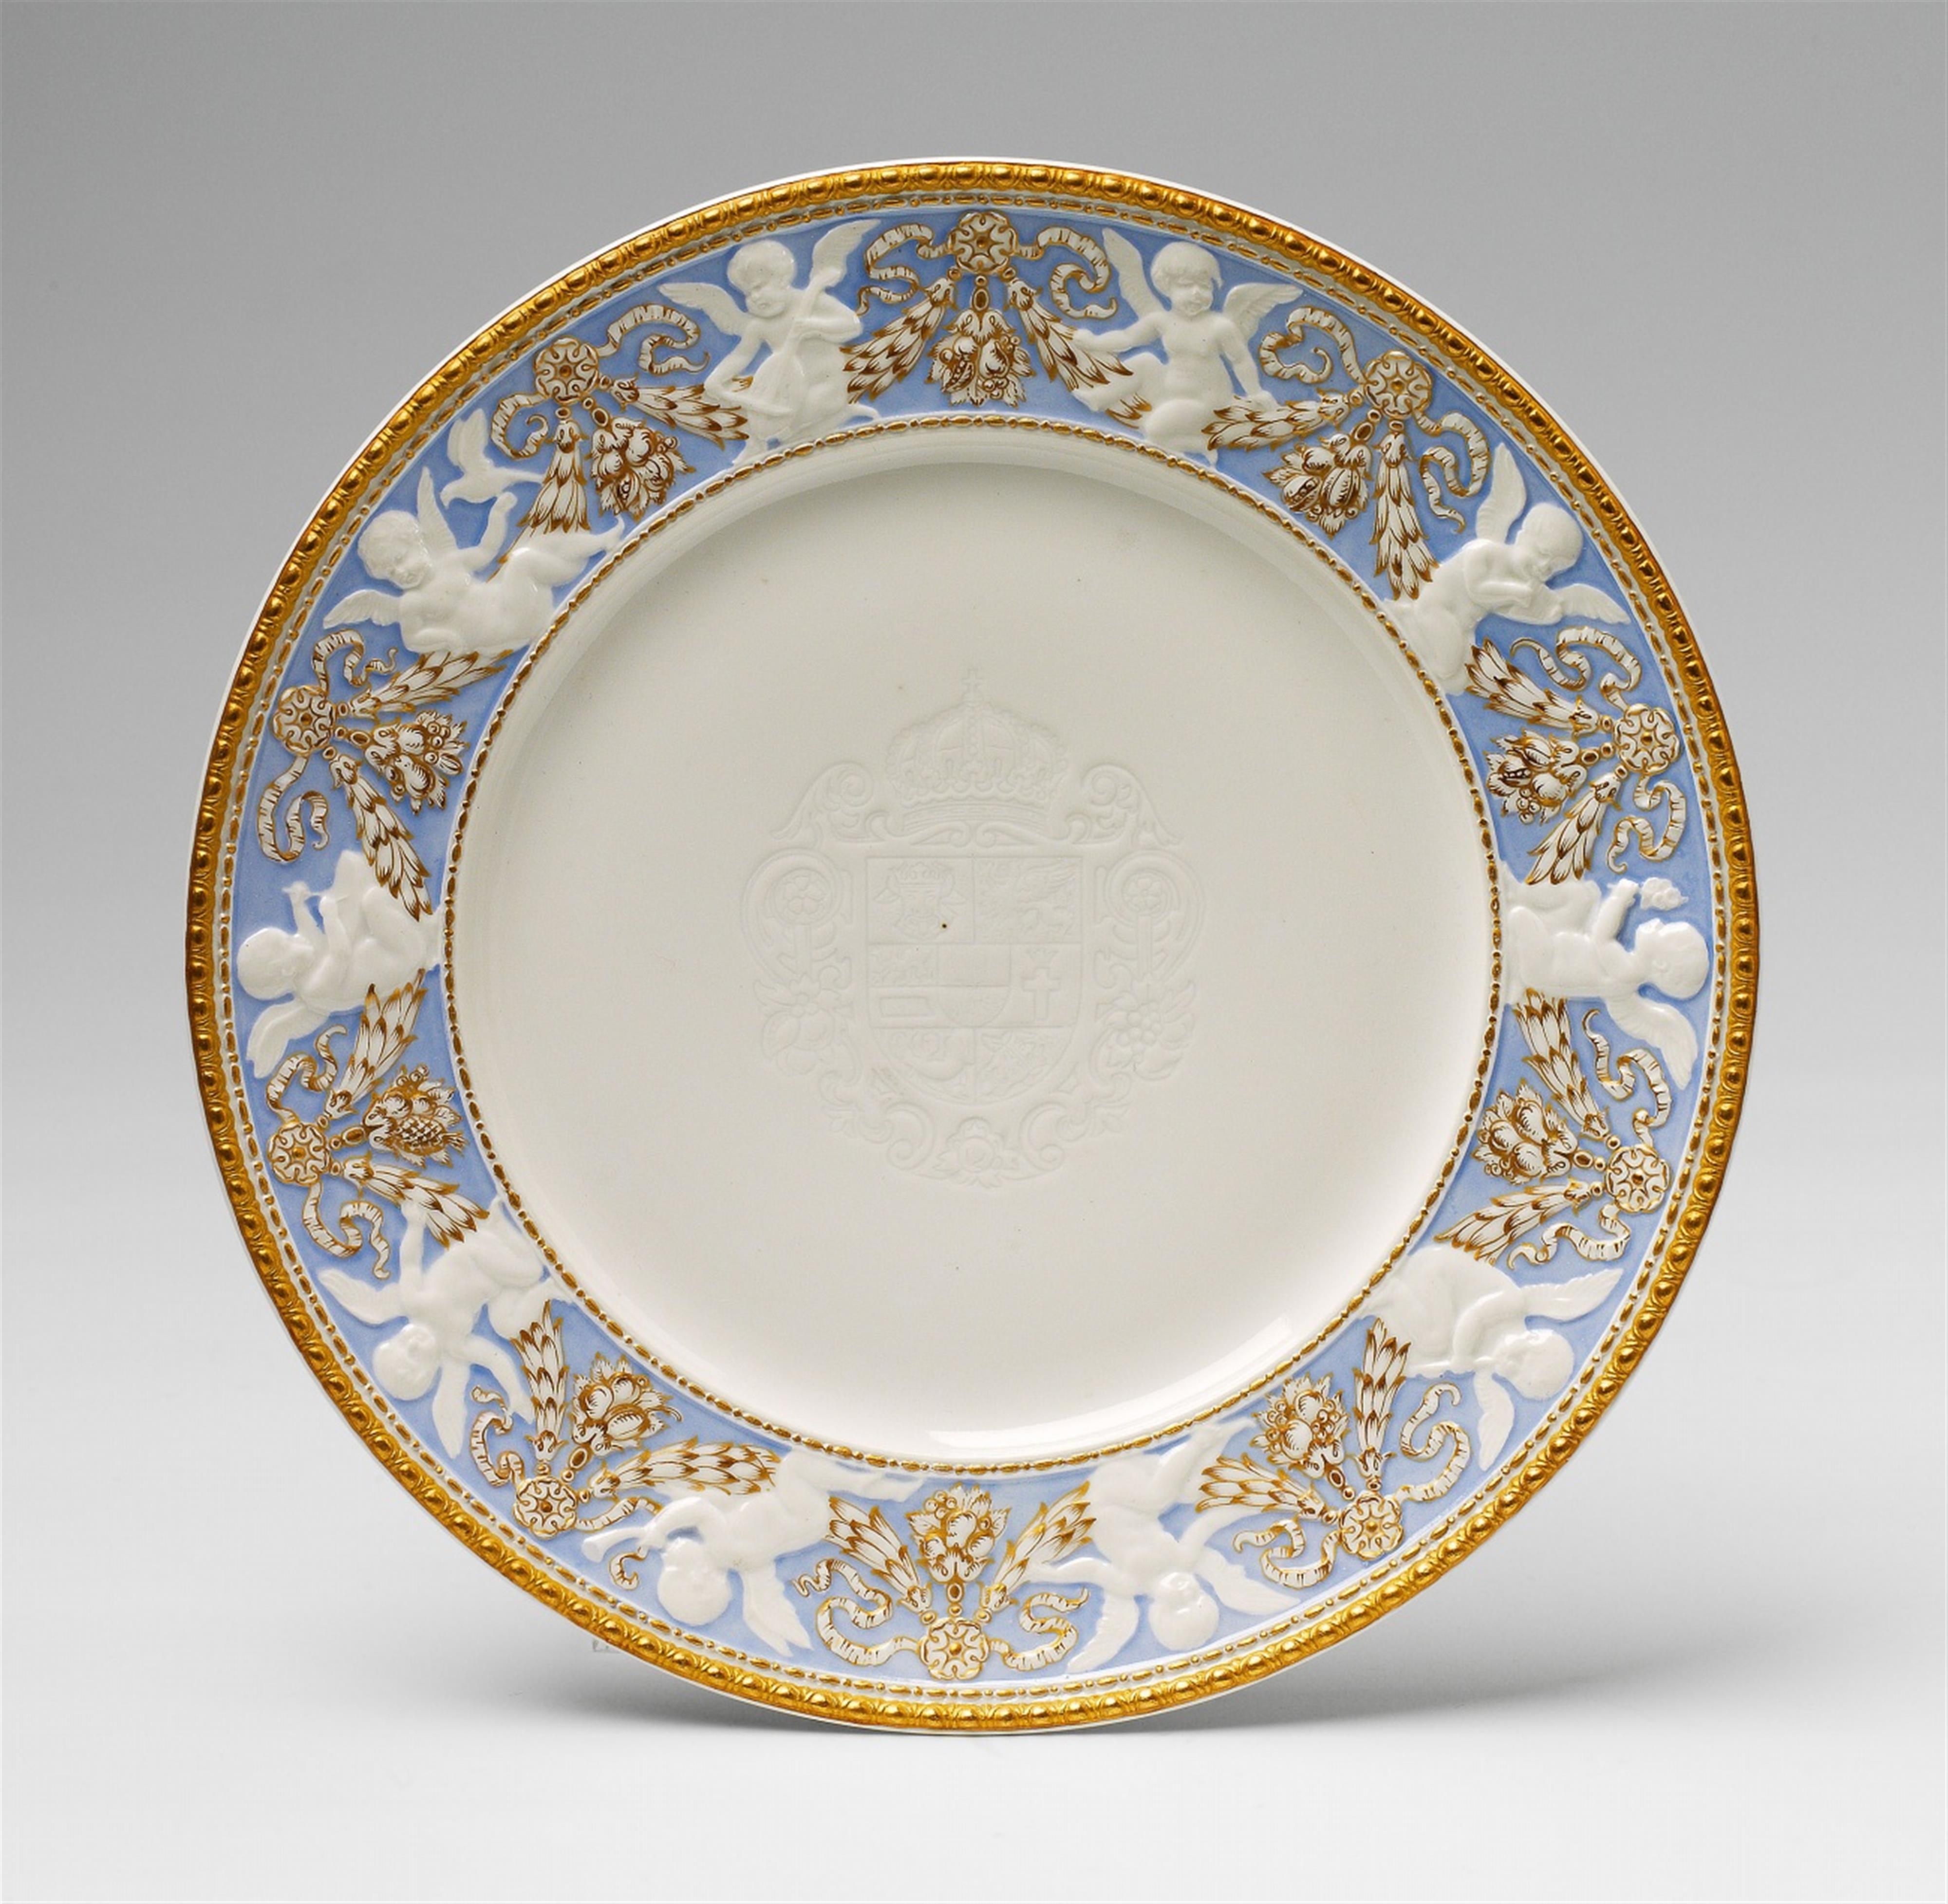 A Berlin KPM porcelain plate from the service for Schwerin palace - image-1